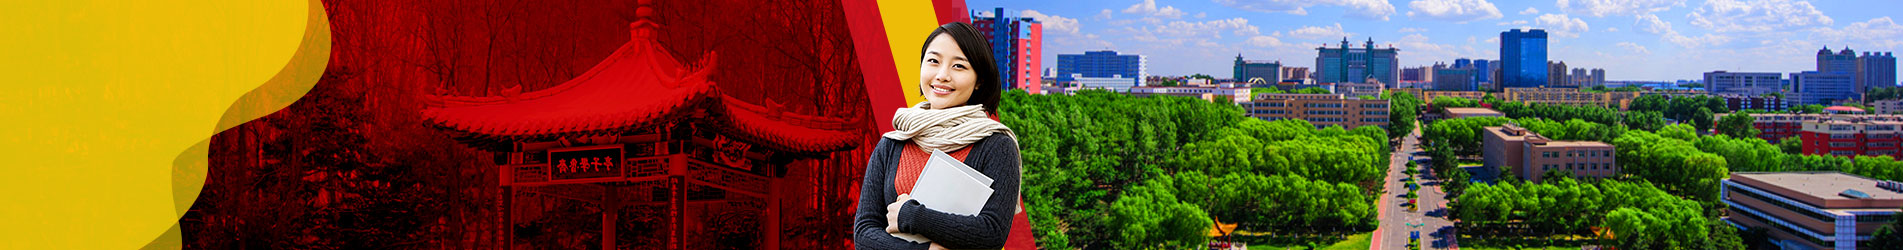 Study in Changchun University of Science and Technology
